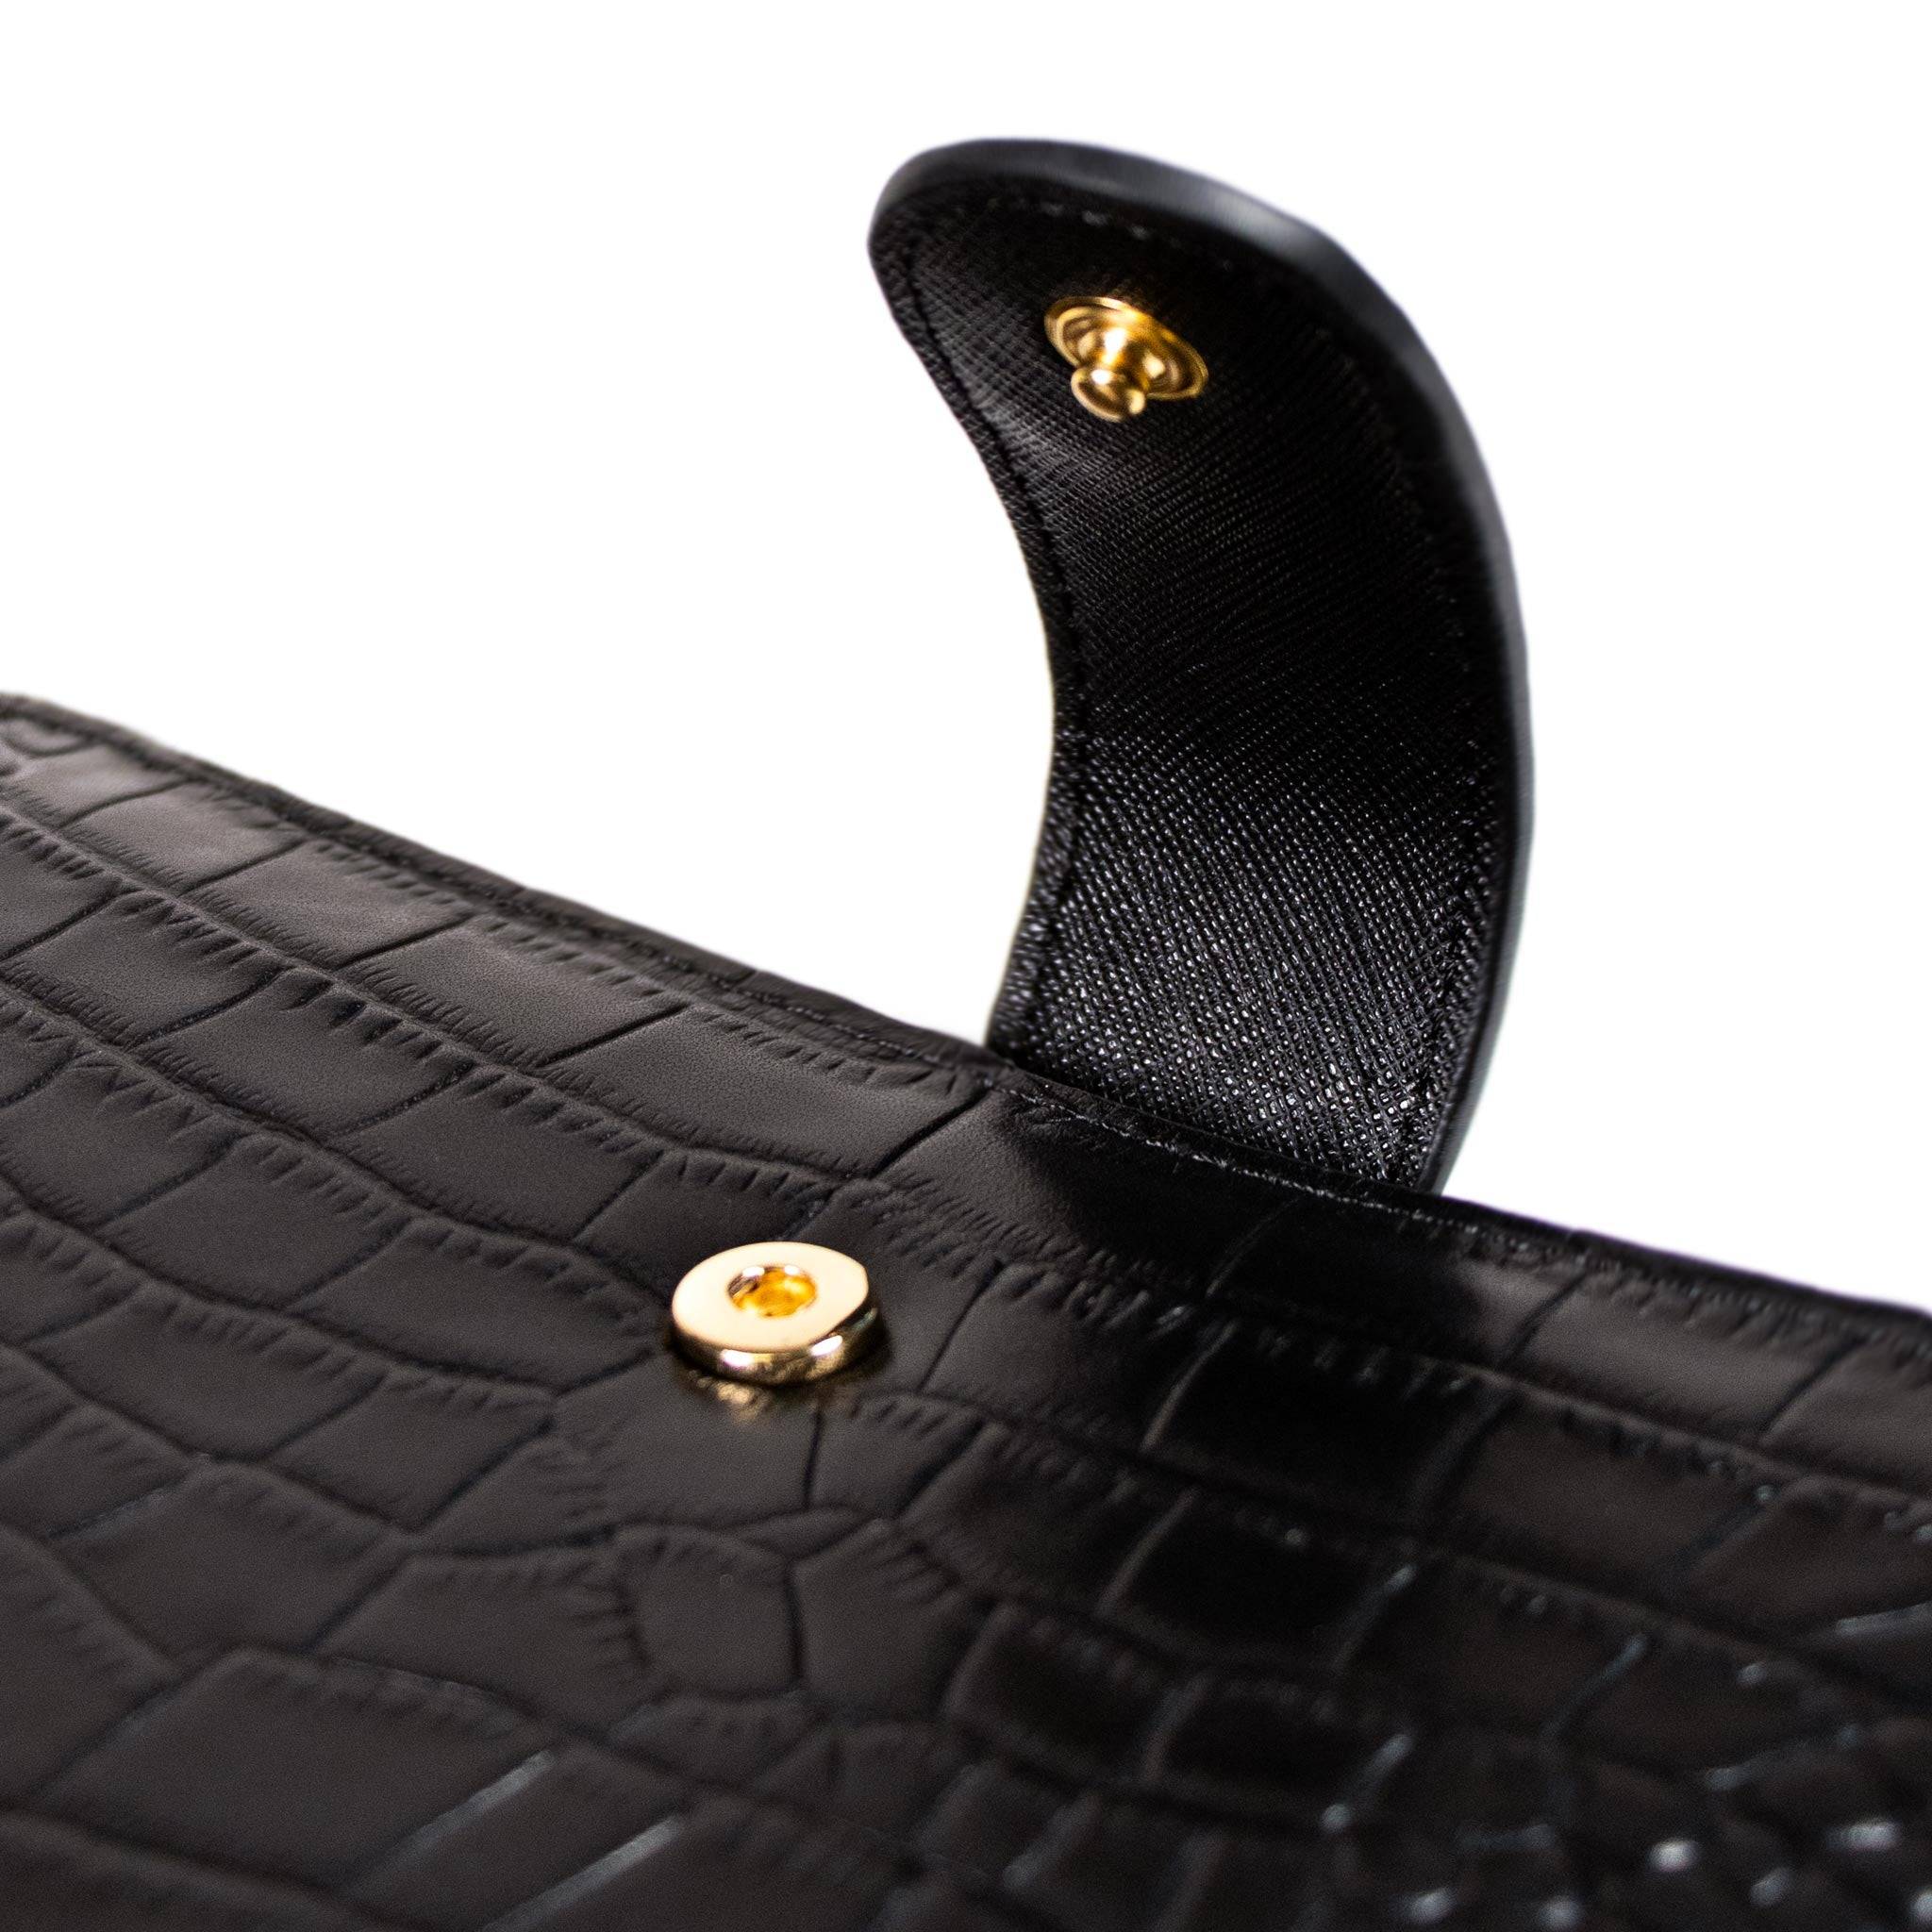 Close up image of gold metal snap closure on black croc leather agenda cover